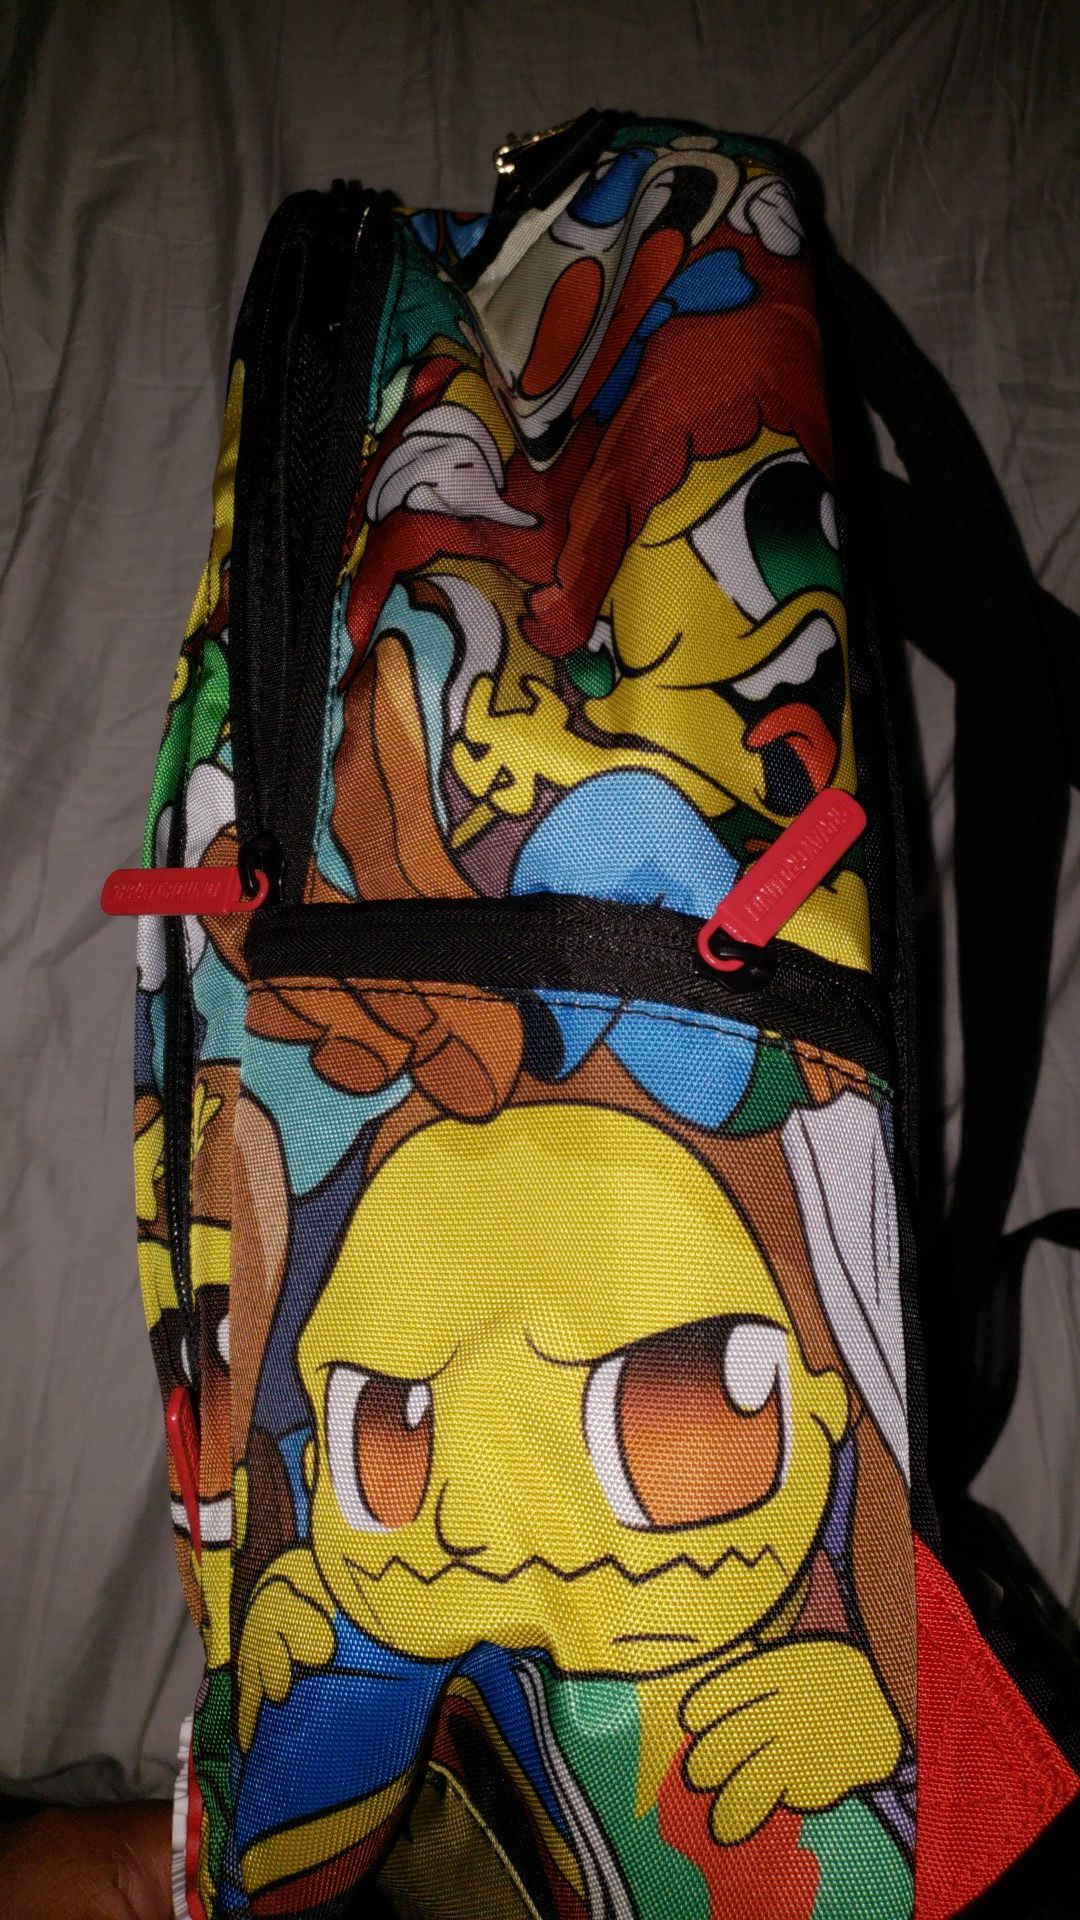 Sprayground backpack Simpsons for Sale in Ontario, CA - OfferUp